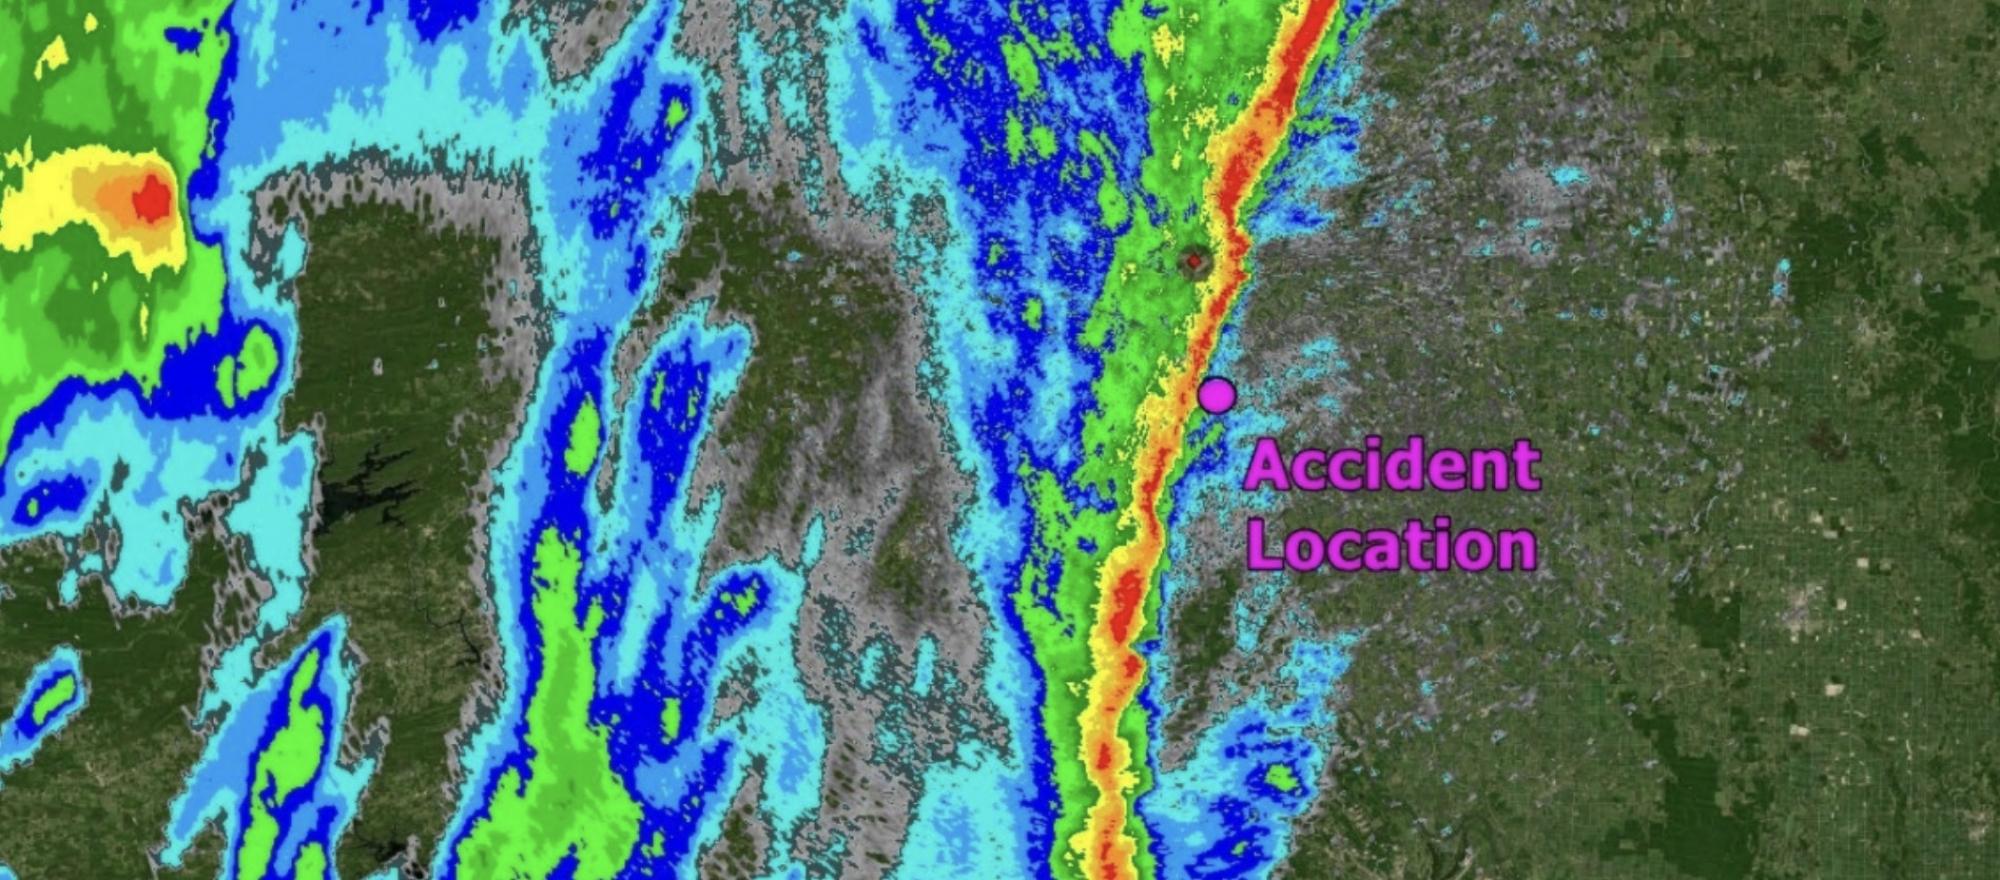 Weather radar map depicting accident location and weather at time of aircraft crash